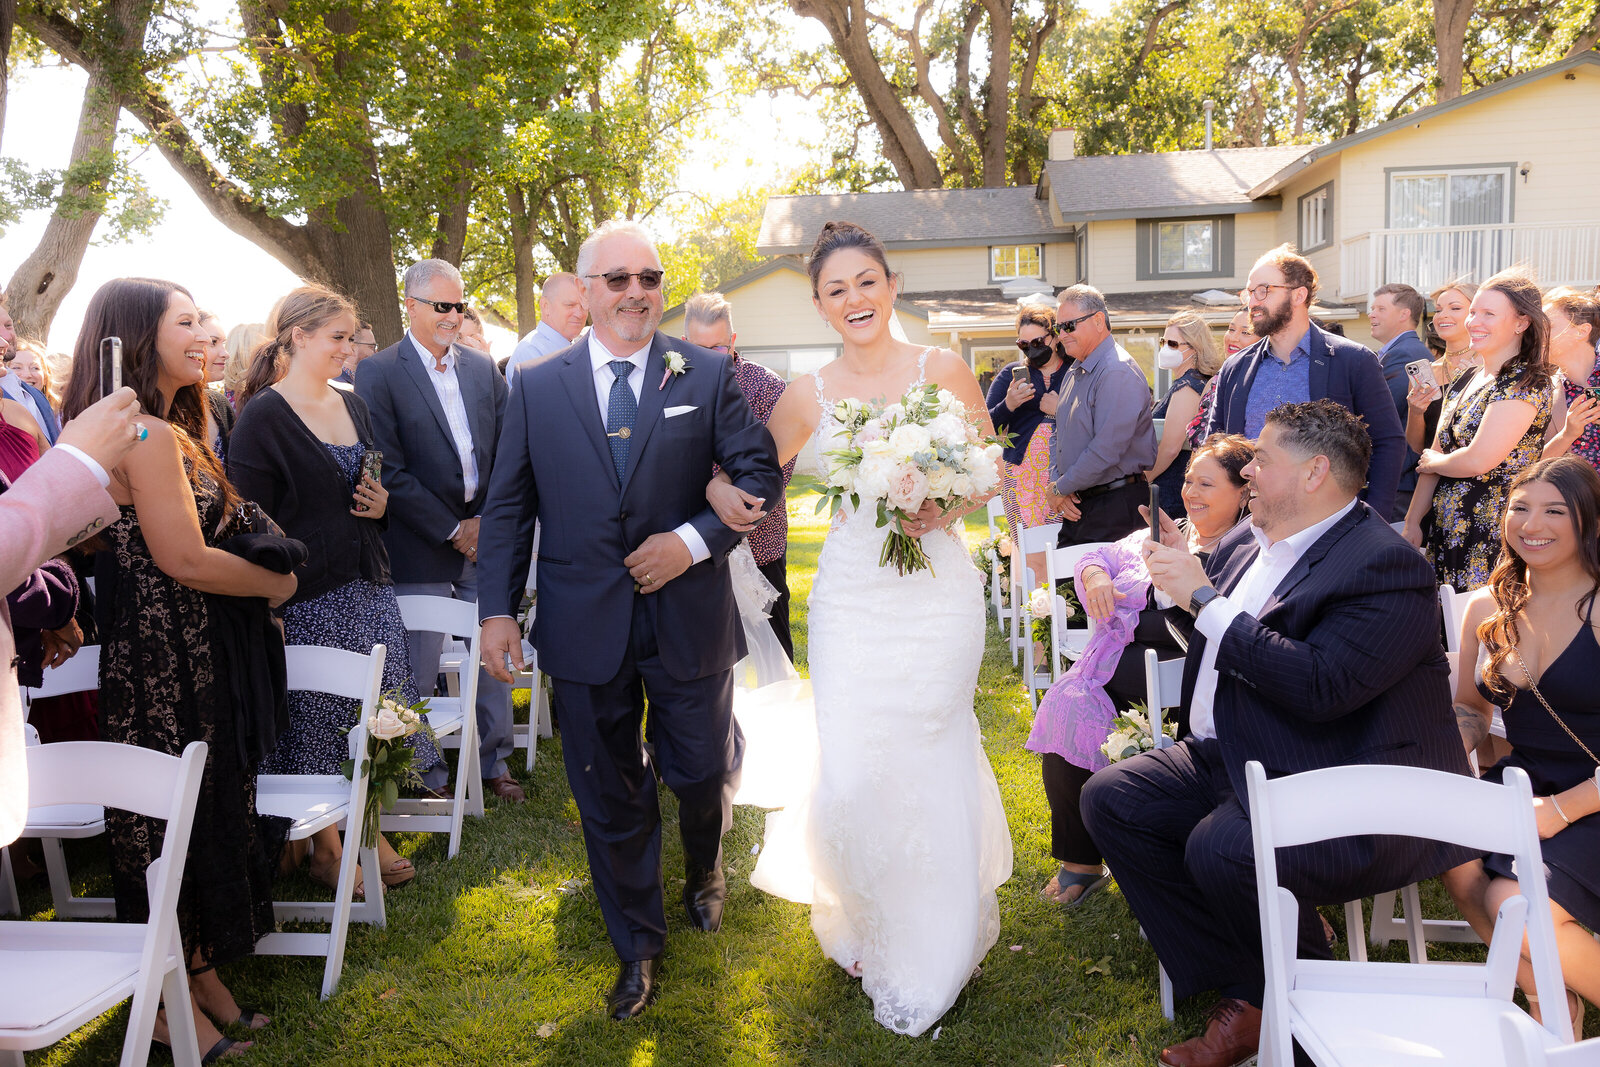 Philippe Studio Pro, Sacramento wedding photographer, captures bride walking down aisle with father during wedding ceremony with guests standing on both sides.